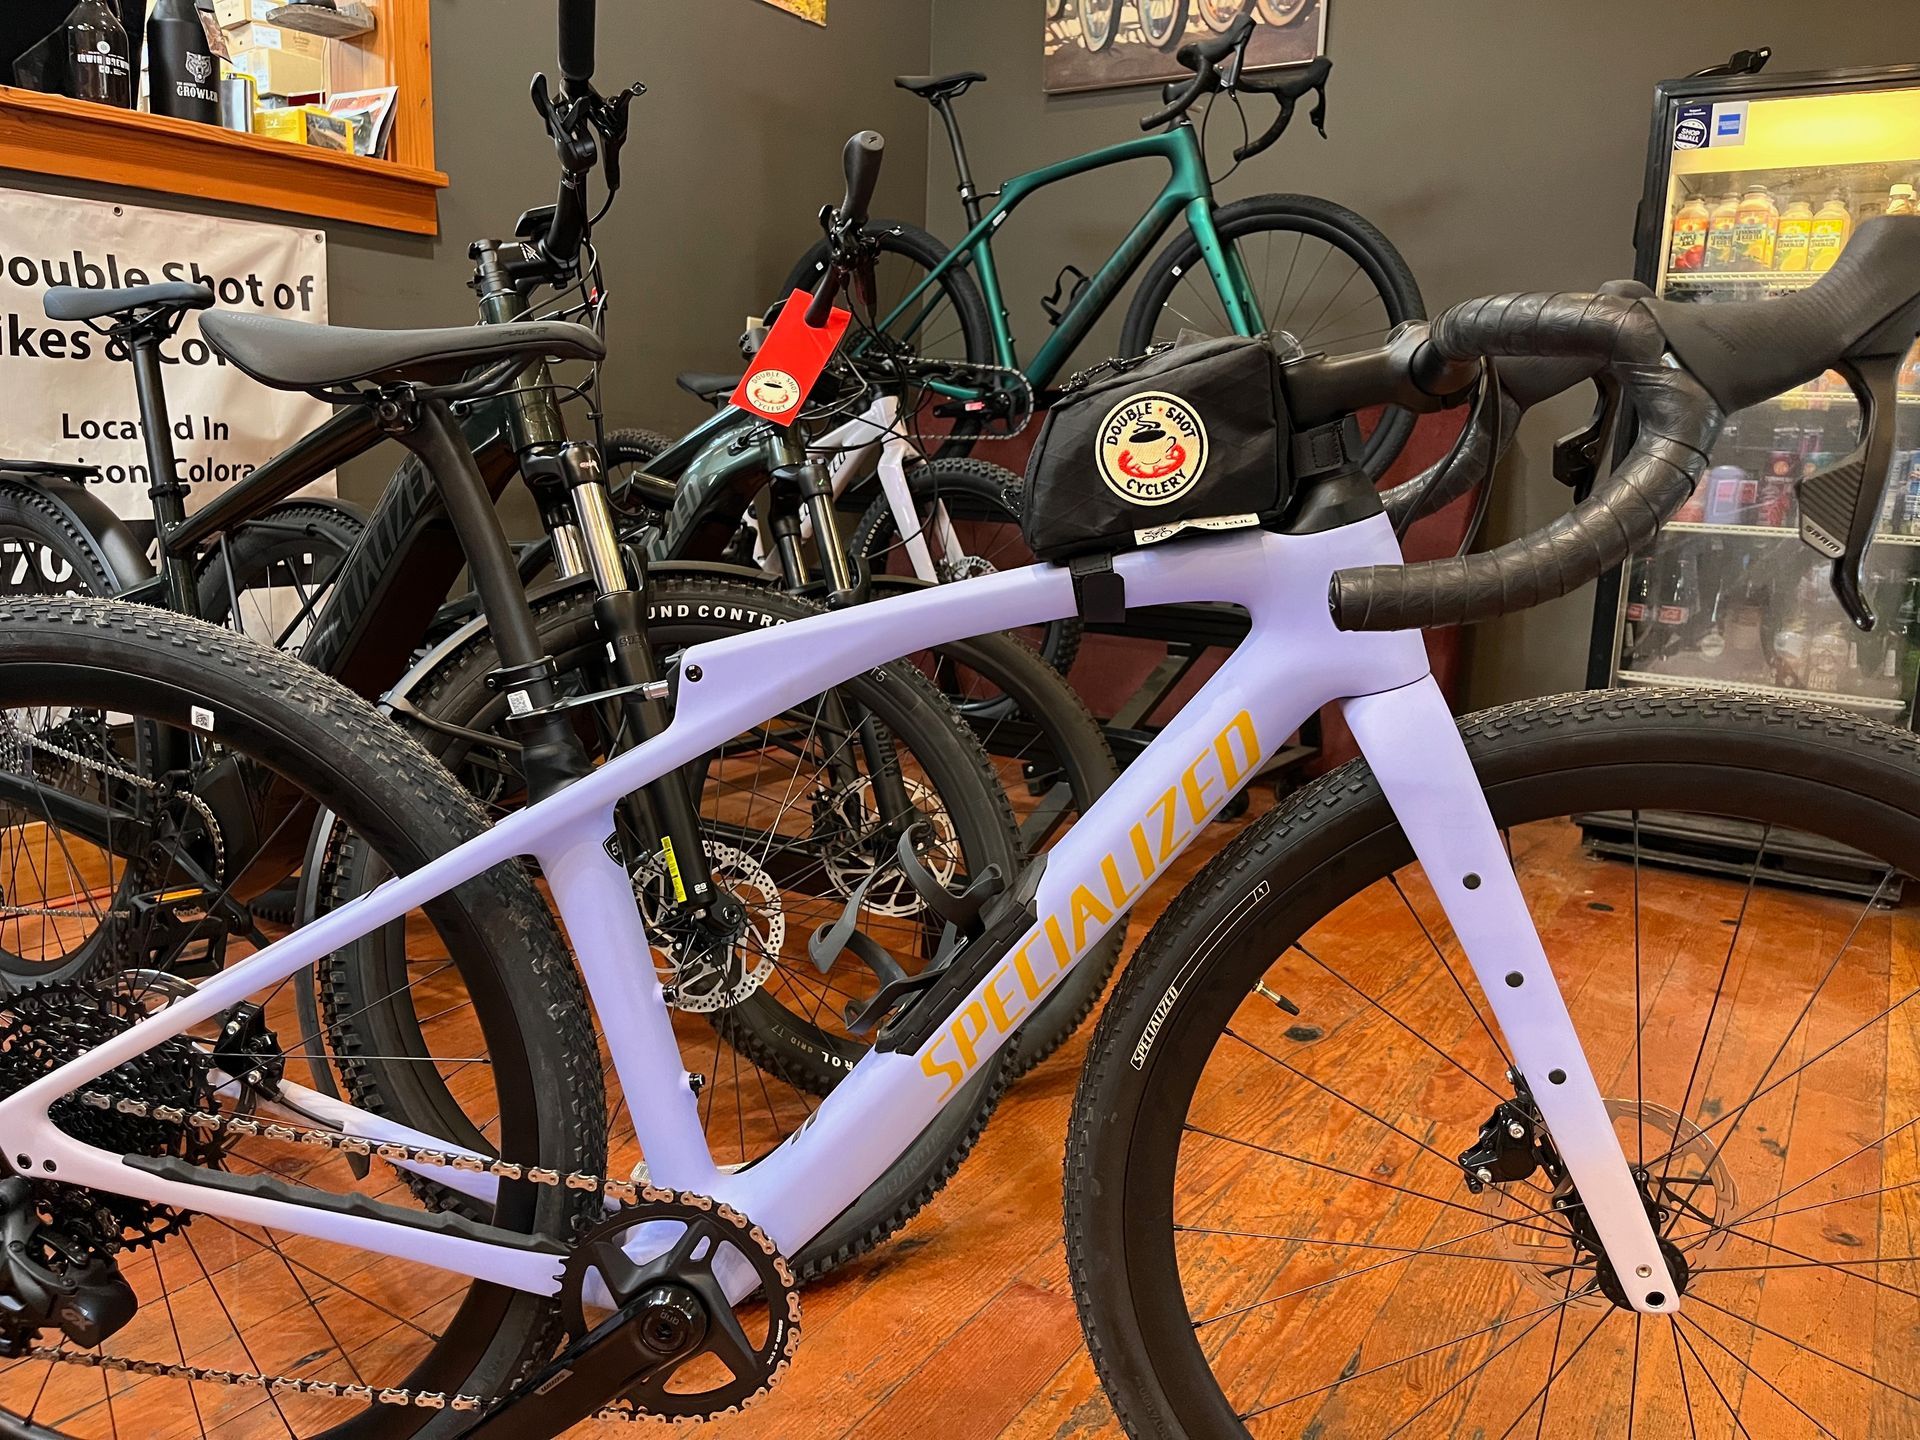 A purple specialized bike is sitting on a wooden floor next to other bikes.